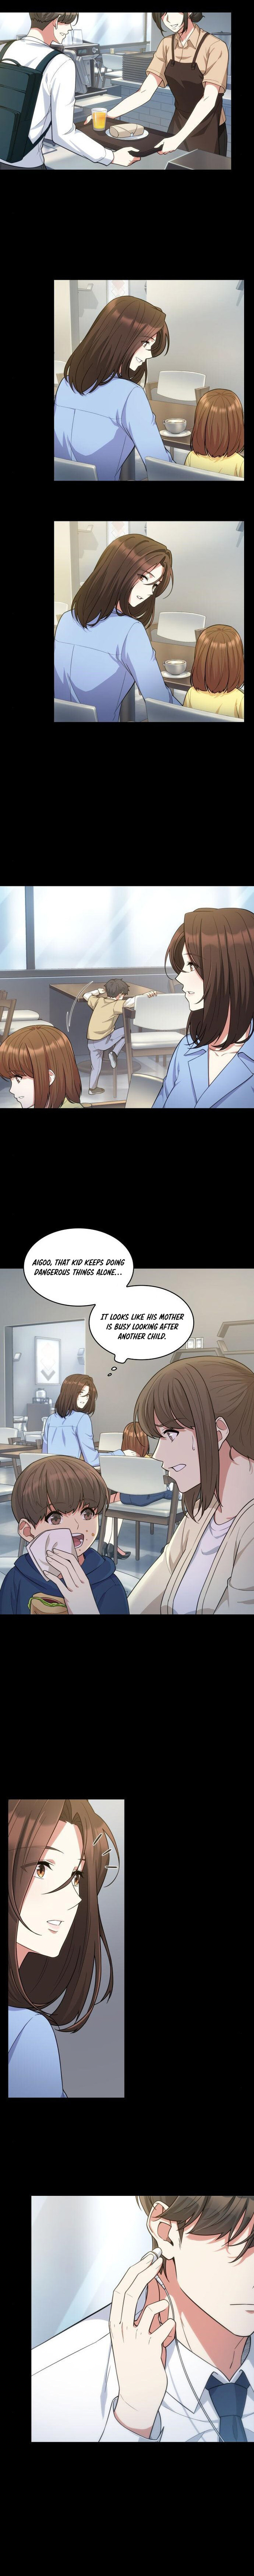 Our Office Story - Chapter 41 Page 4